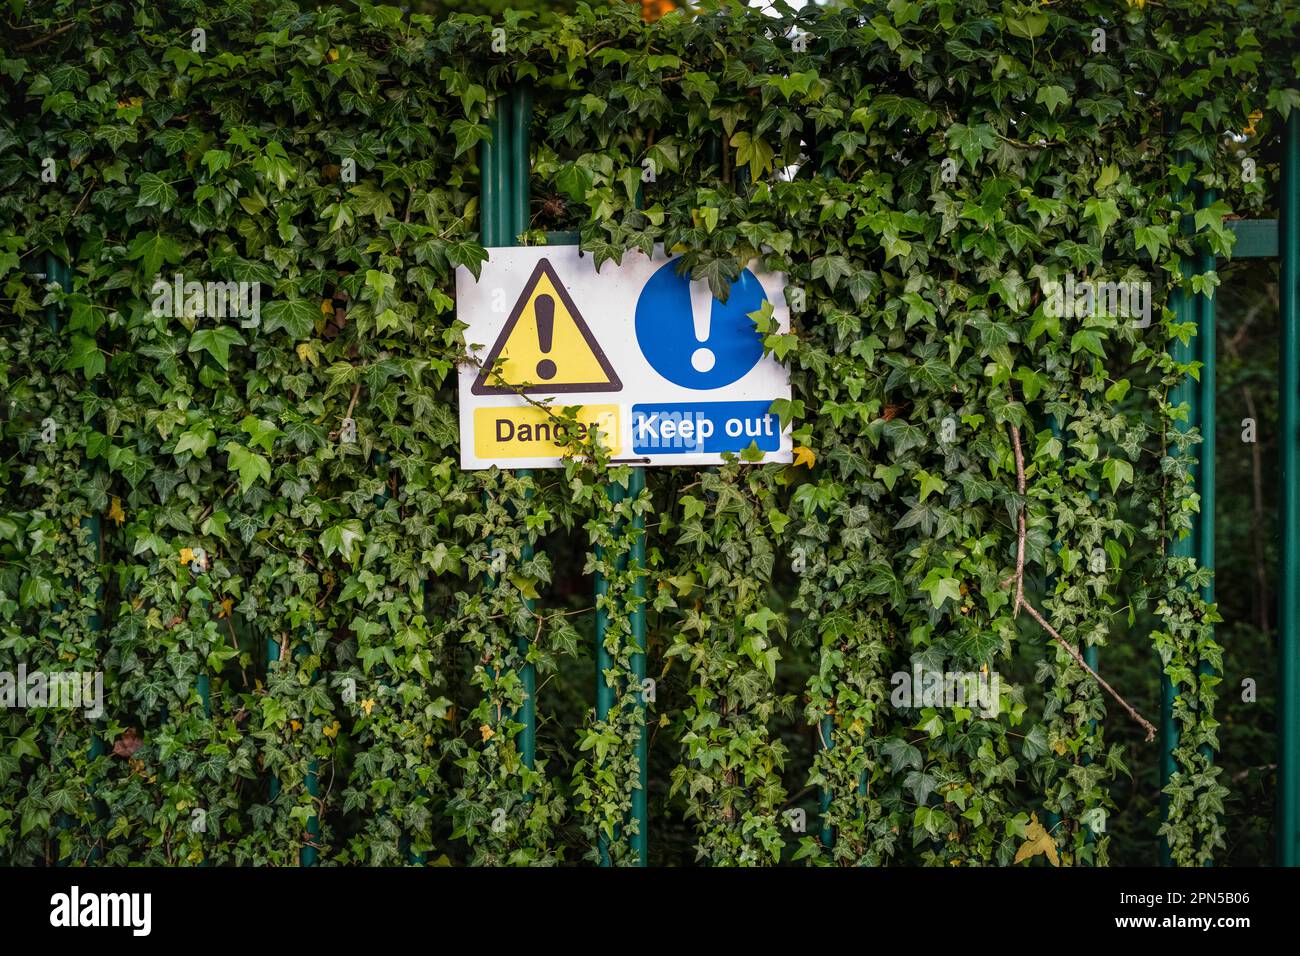 Signage being  obscured by greenery and foliage Stock Photo